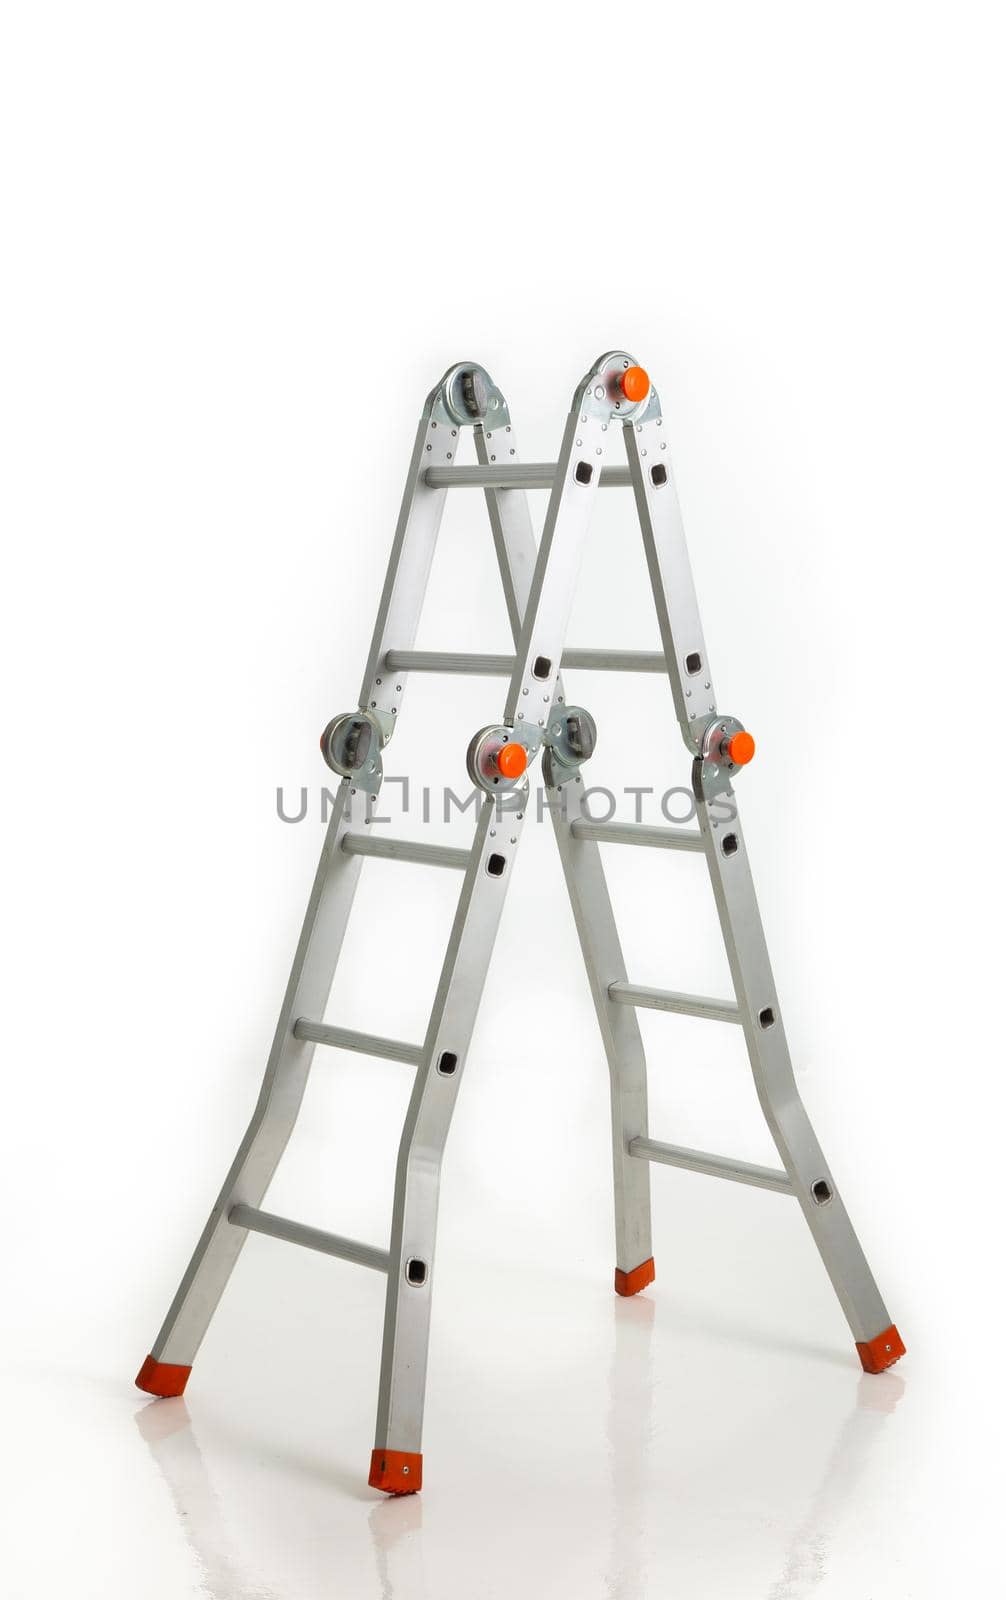 Construction ladder on white background by tehcheesiong